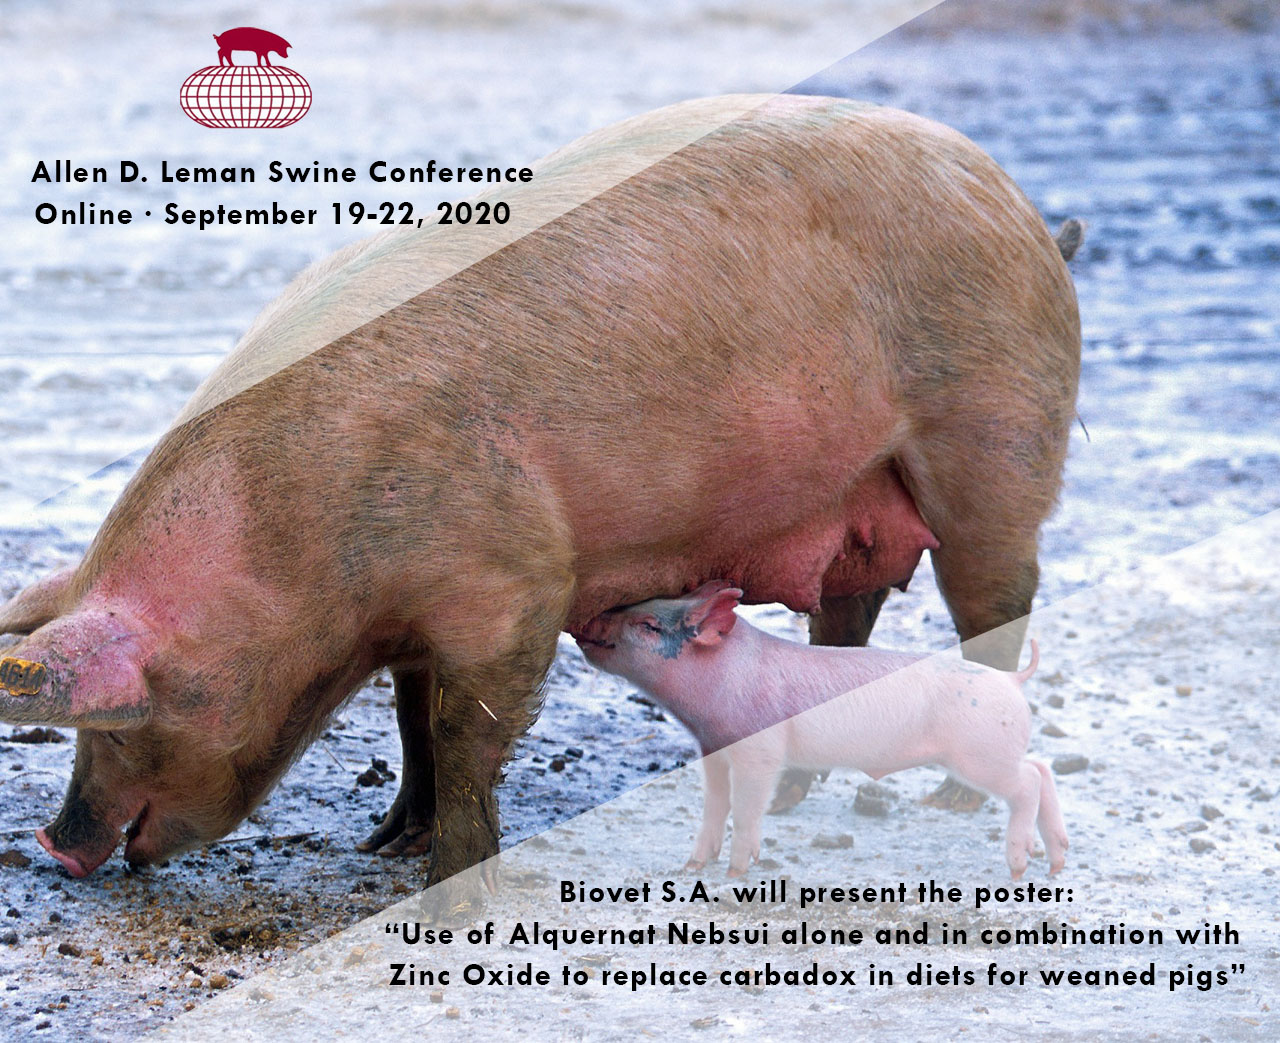 Alquernat Nebsui to control post-weaning diarrhea, poster at the Allen D. Leman Swine Conference